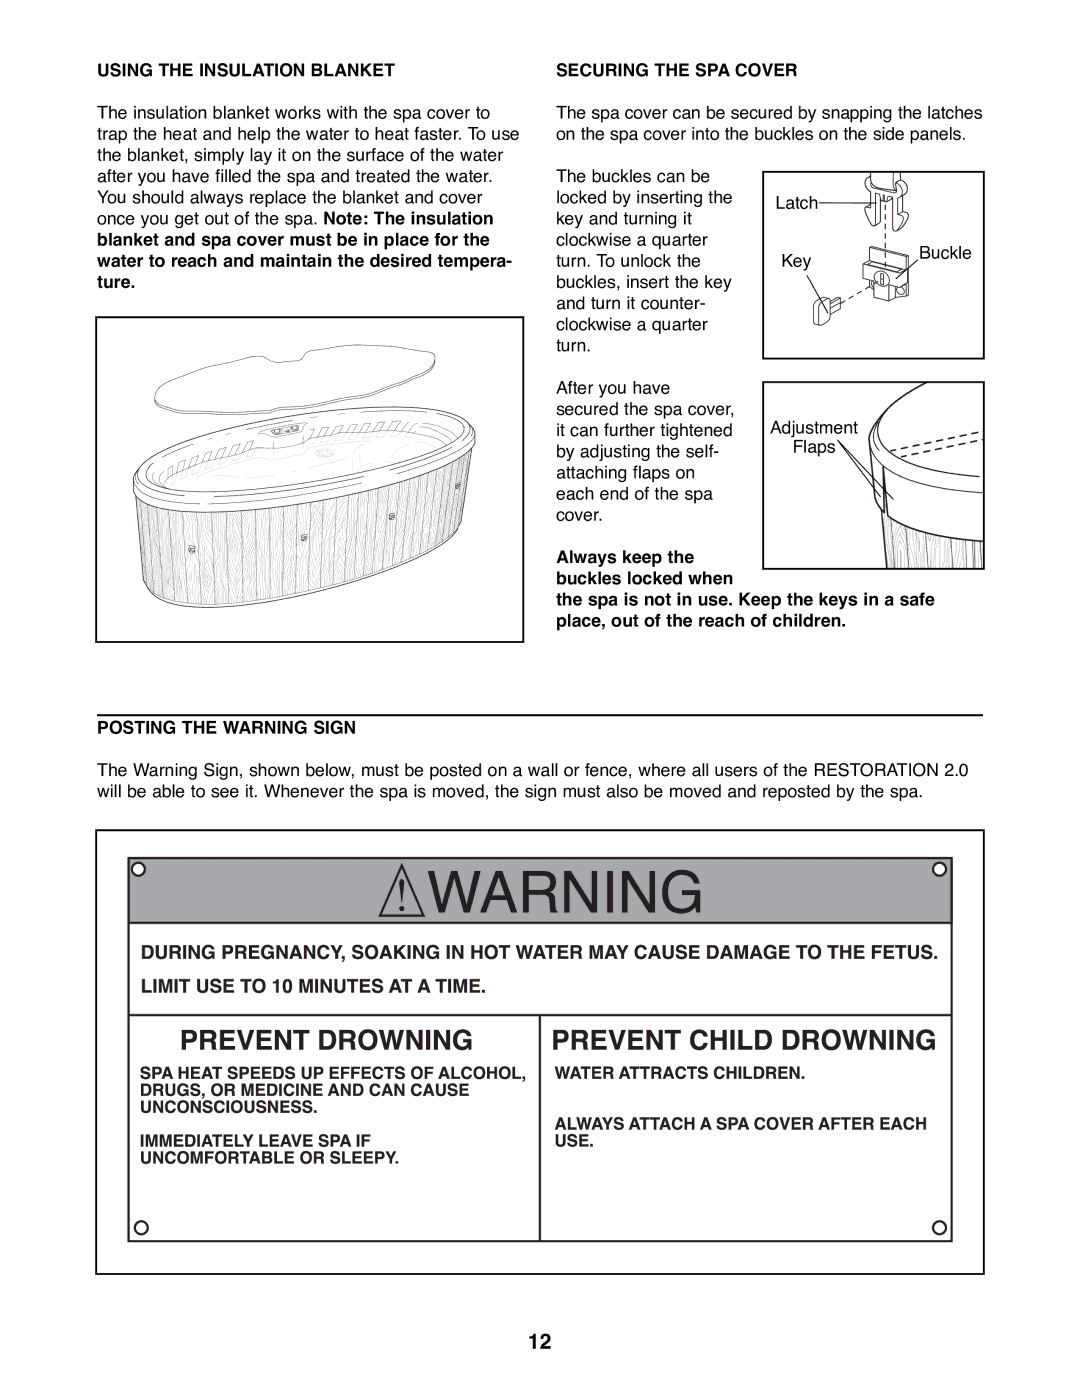 ProForm PFHS70071 manual Using the Insulation Blanket, Securing the SPA Cover, Posting the Warning Sign 